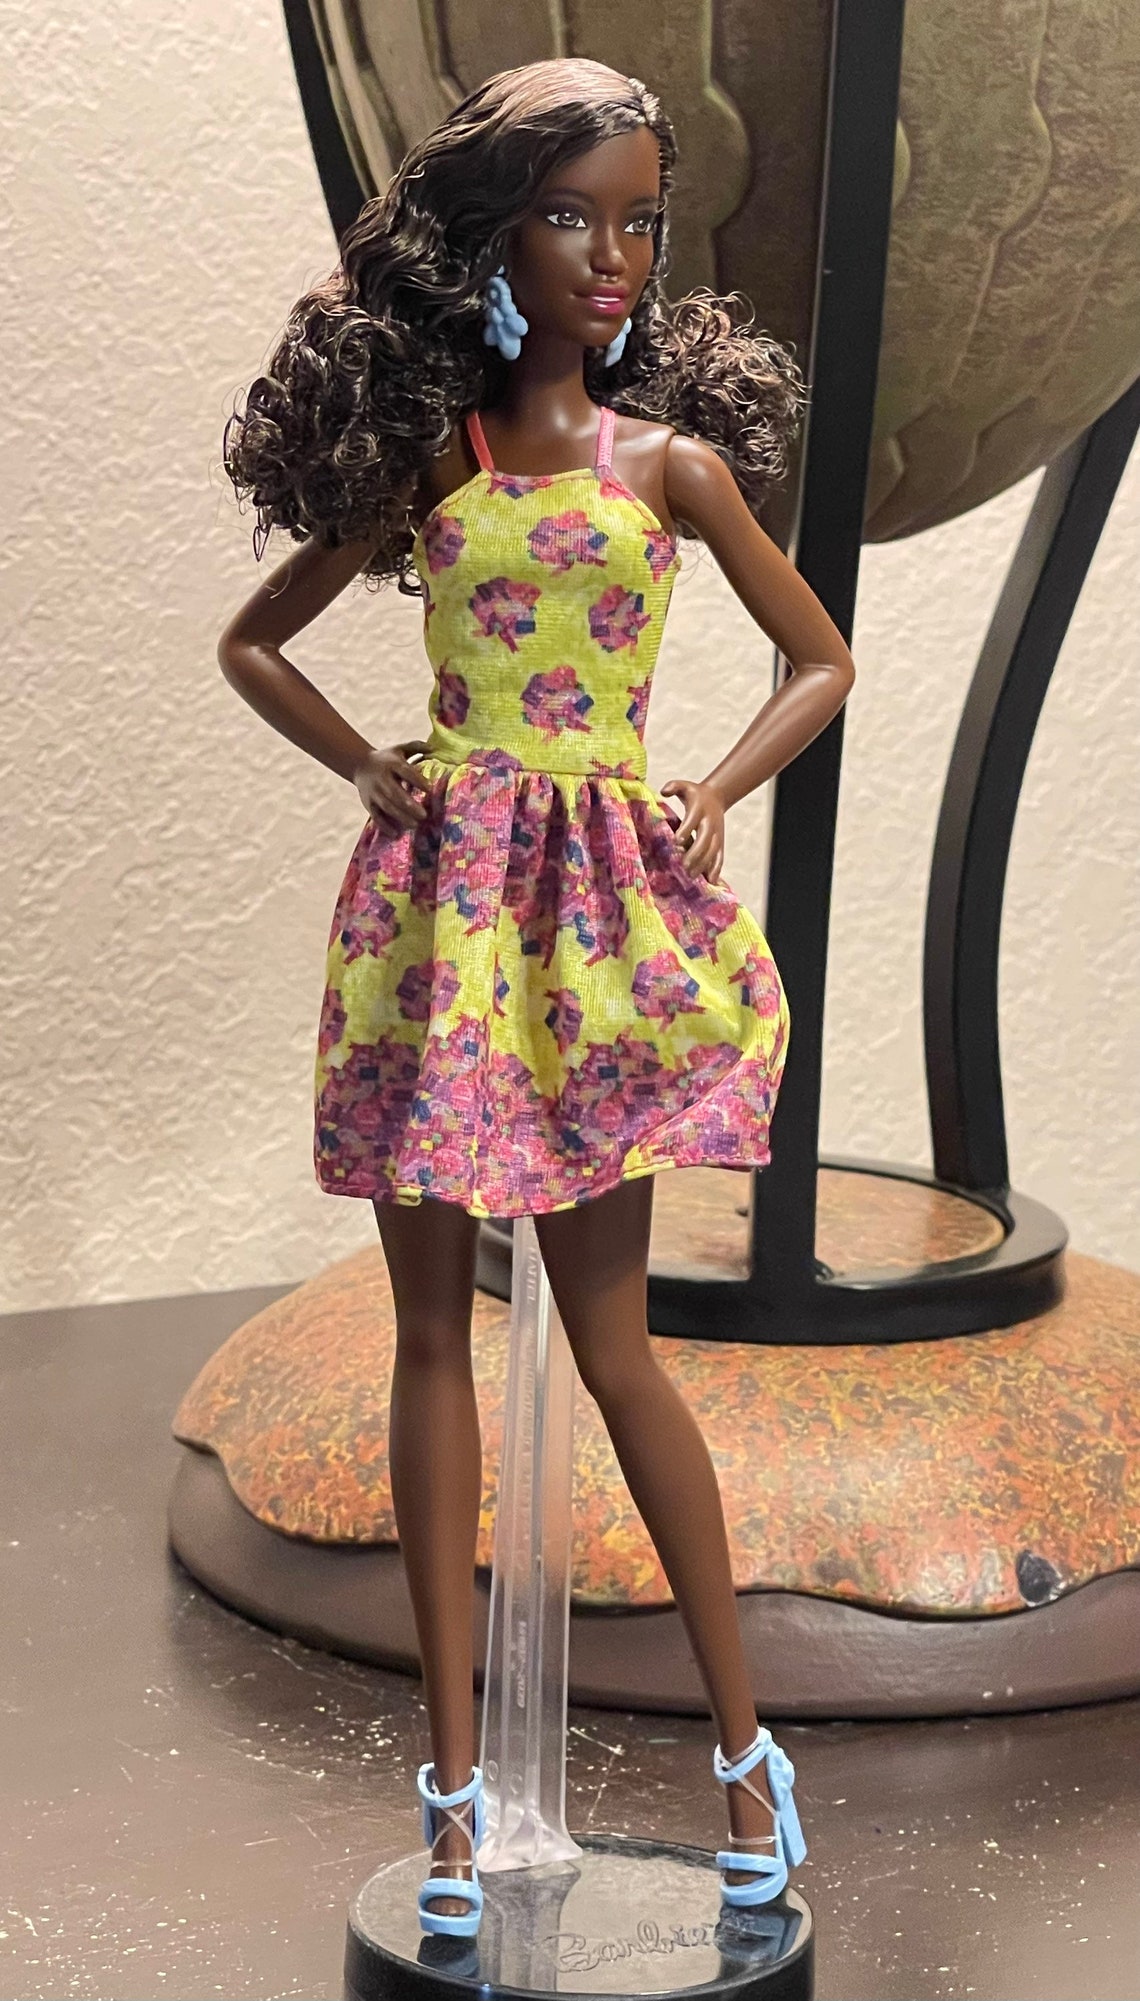 Barbie Doll Aa Kara So In Style New Out Of The Package Etsy